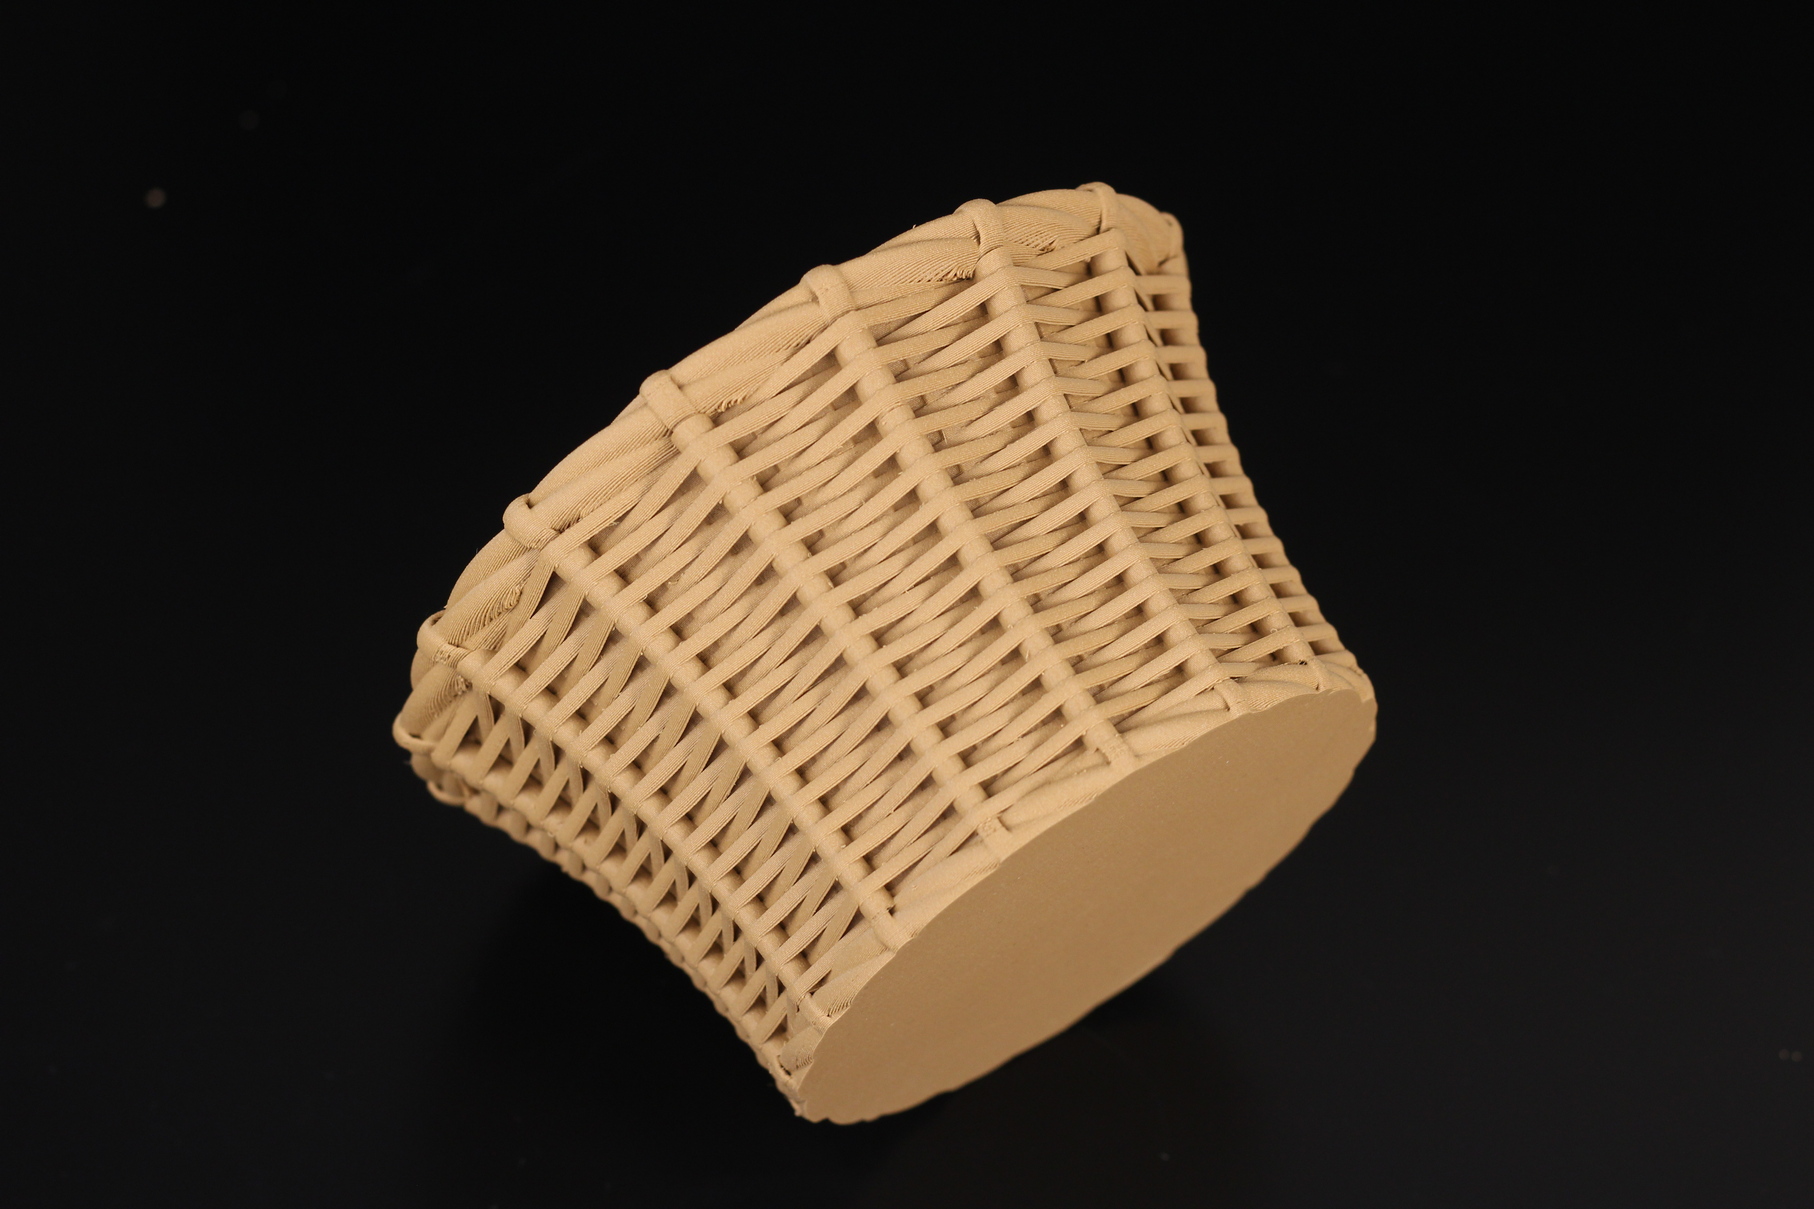 Rattan Basket printed on CR 10 Smart 3 | Creality CR-10 Smart Review: How smart it really is?